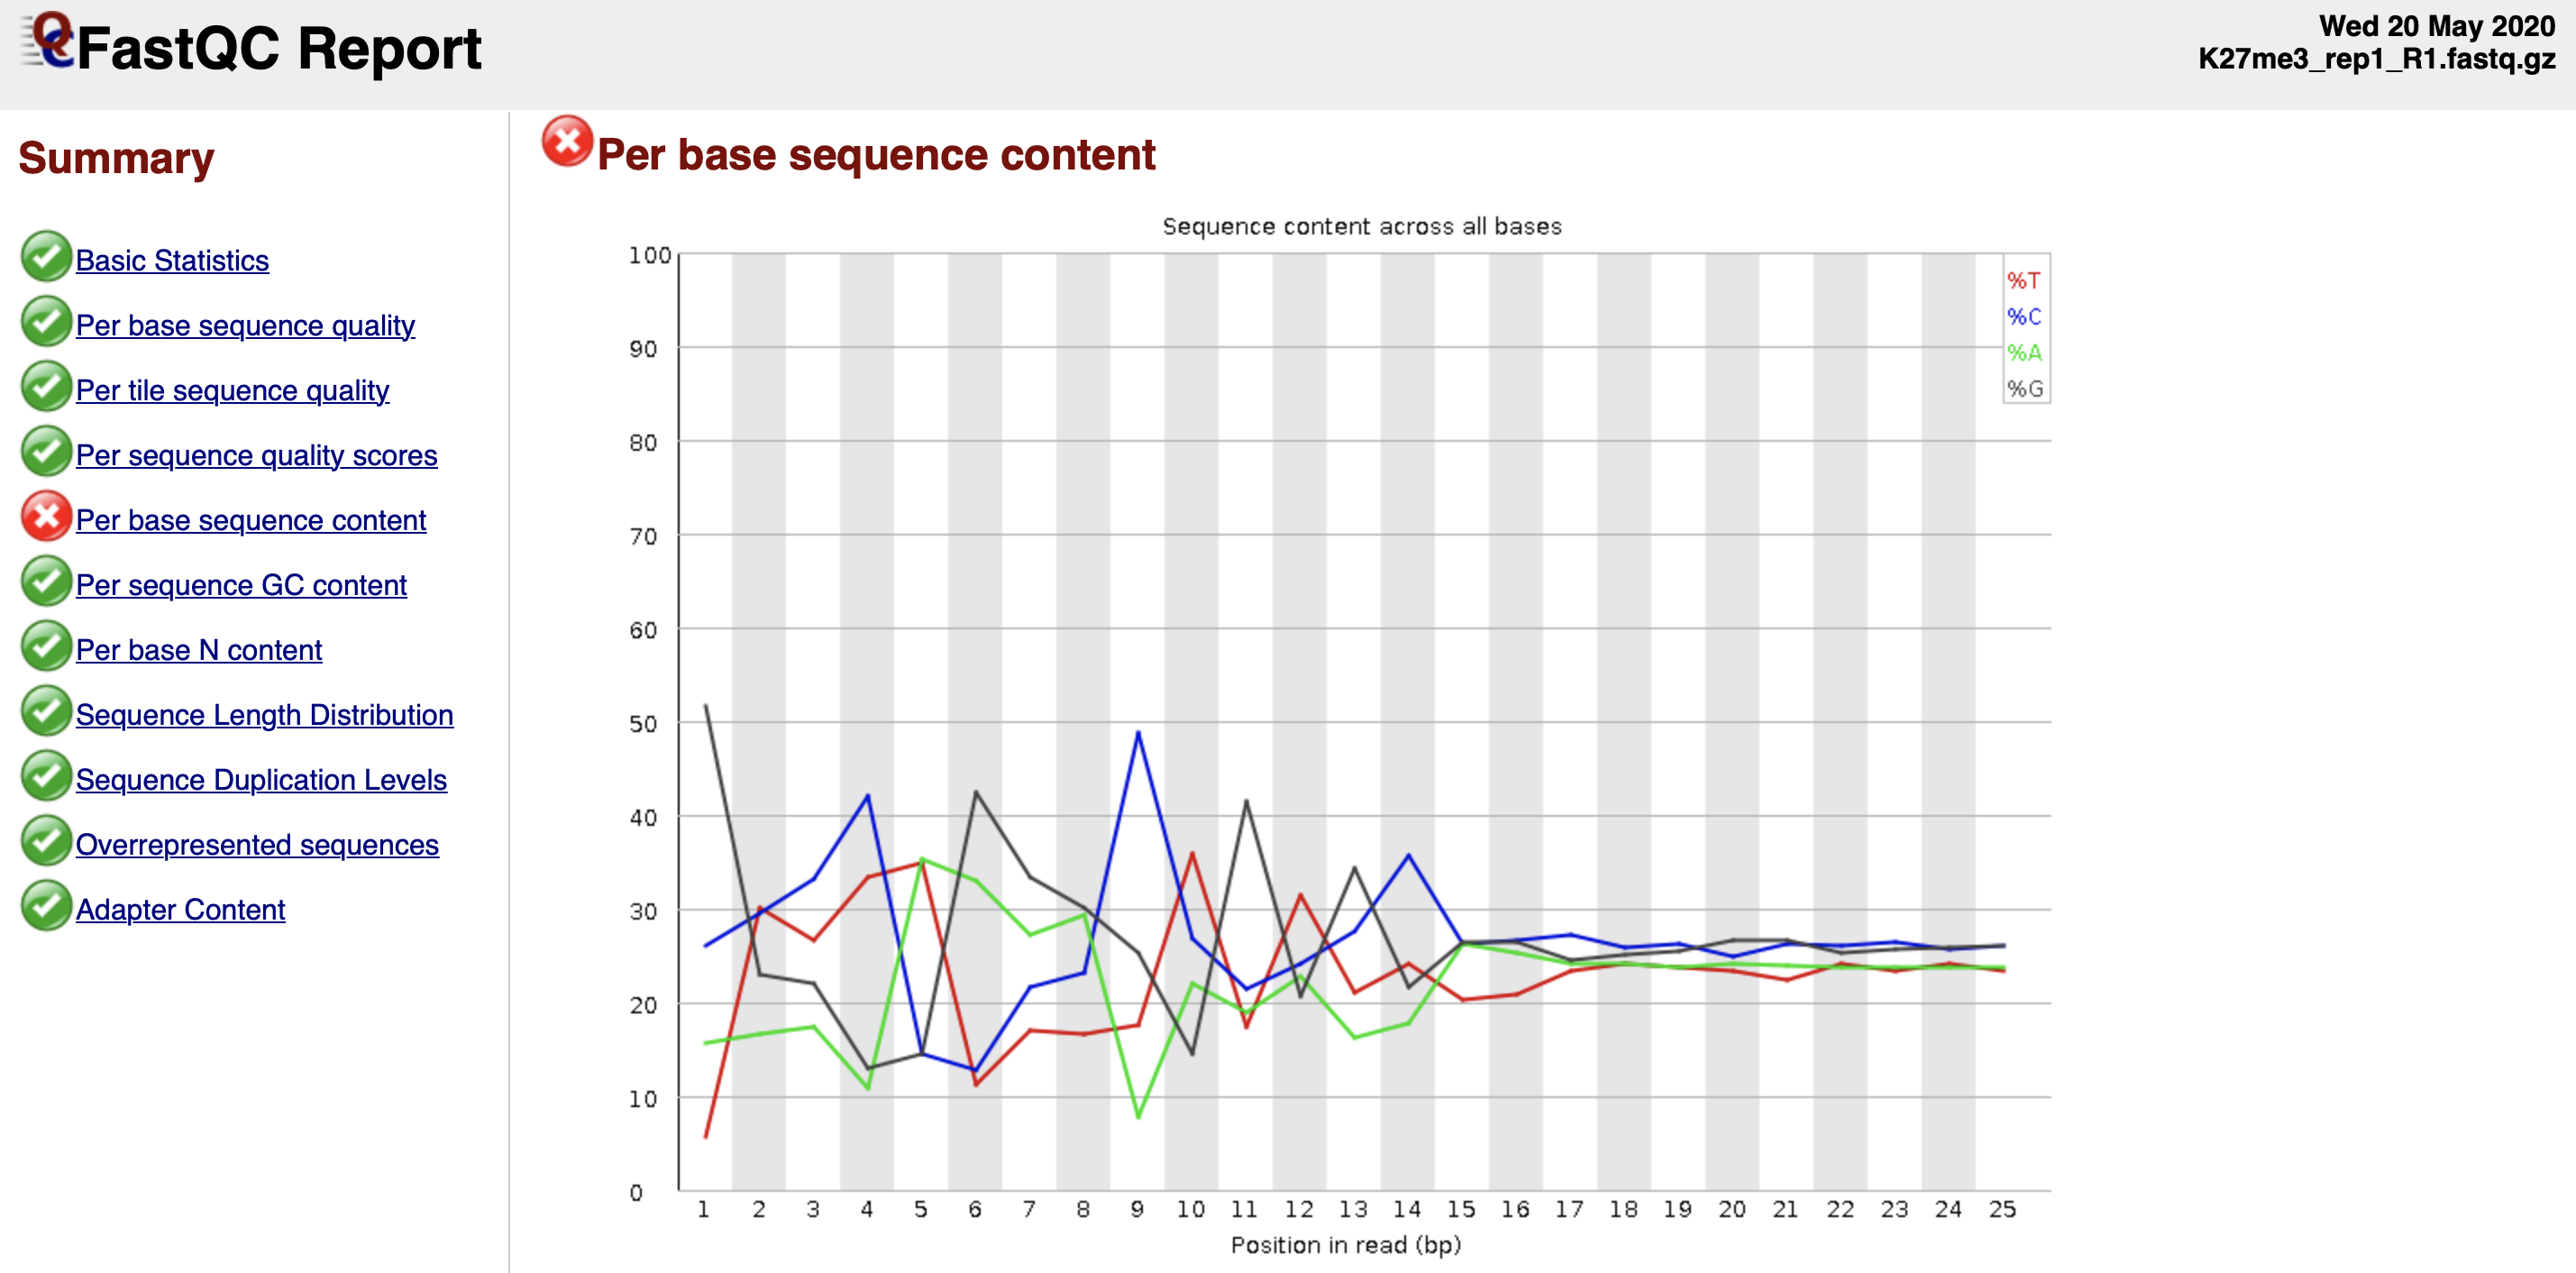 Figure 2. Per base sequence content fails the FastQC quality check.